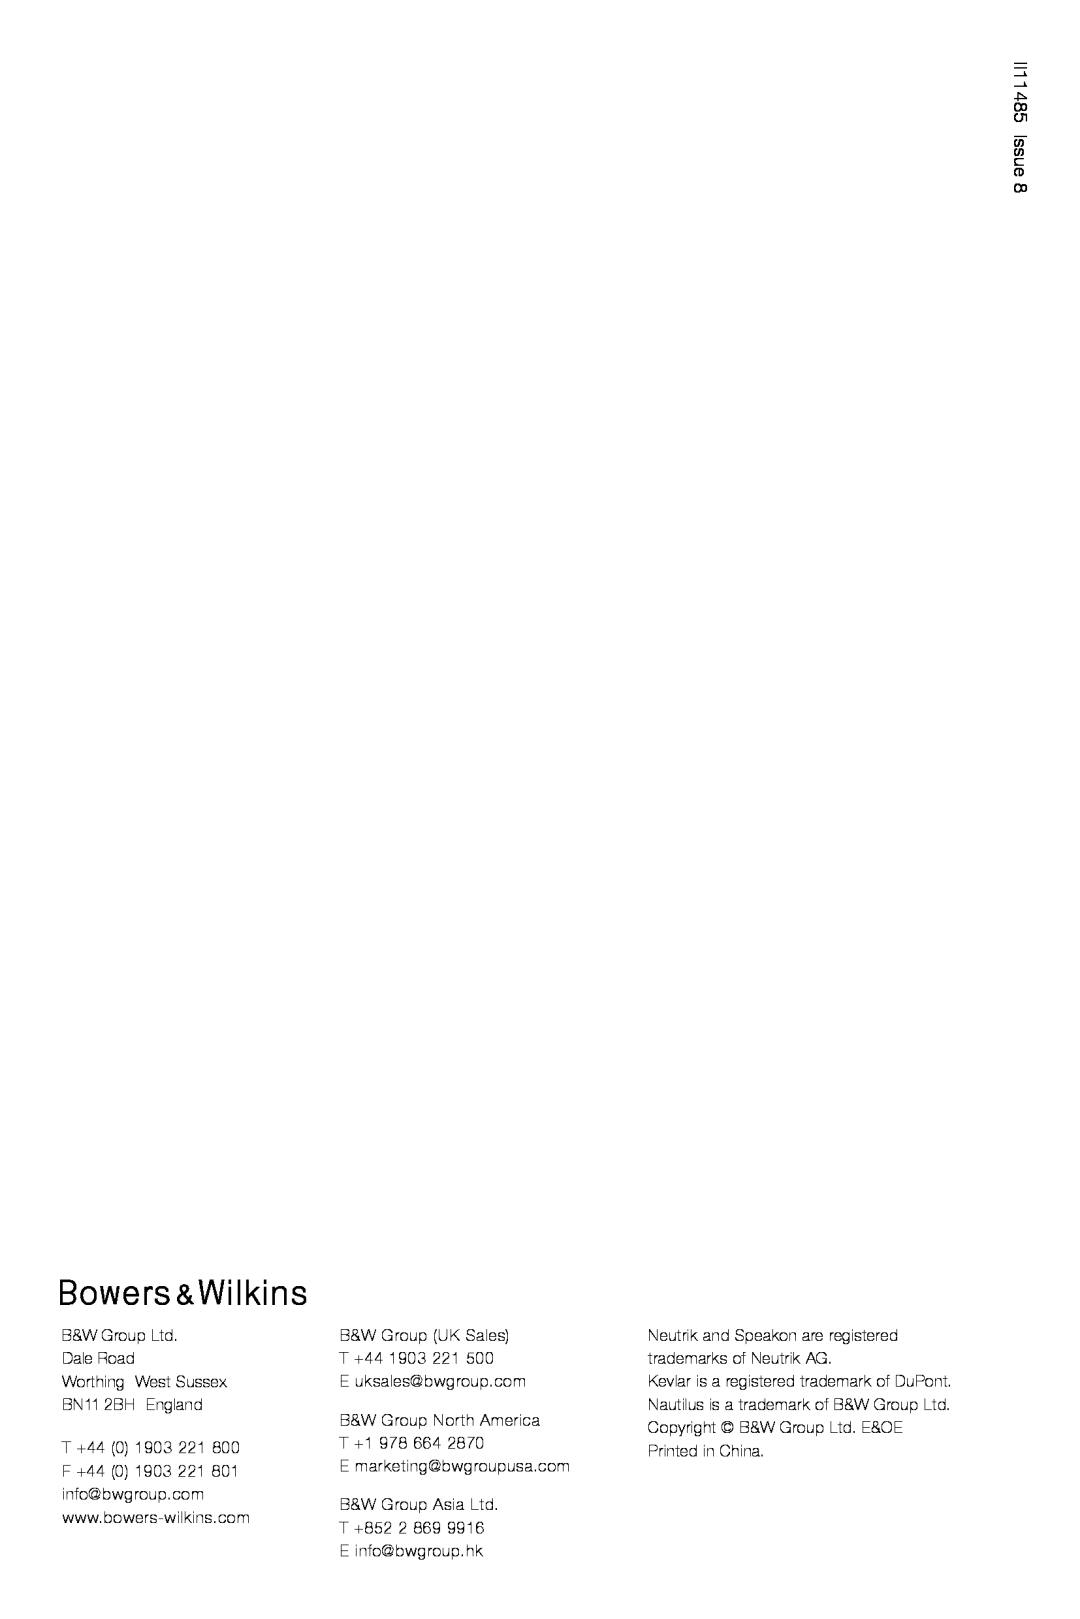 Bowers & Wilkins CT7.5 LCRS, CT7.3 LCRS, CT7.4 LCRS installation manual II11485 Issue 